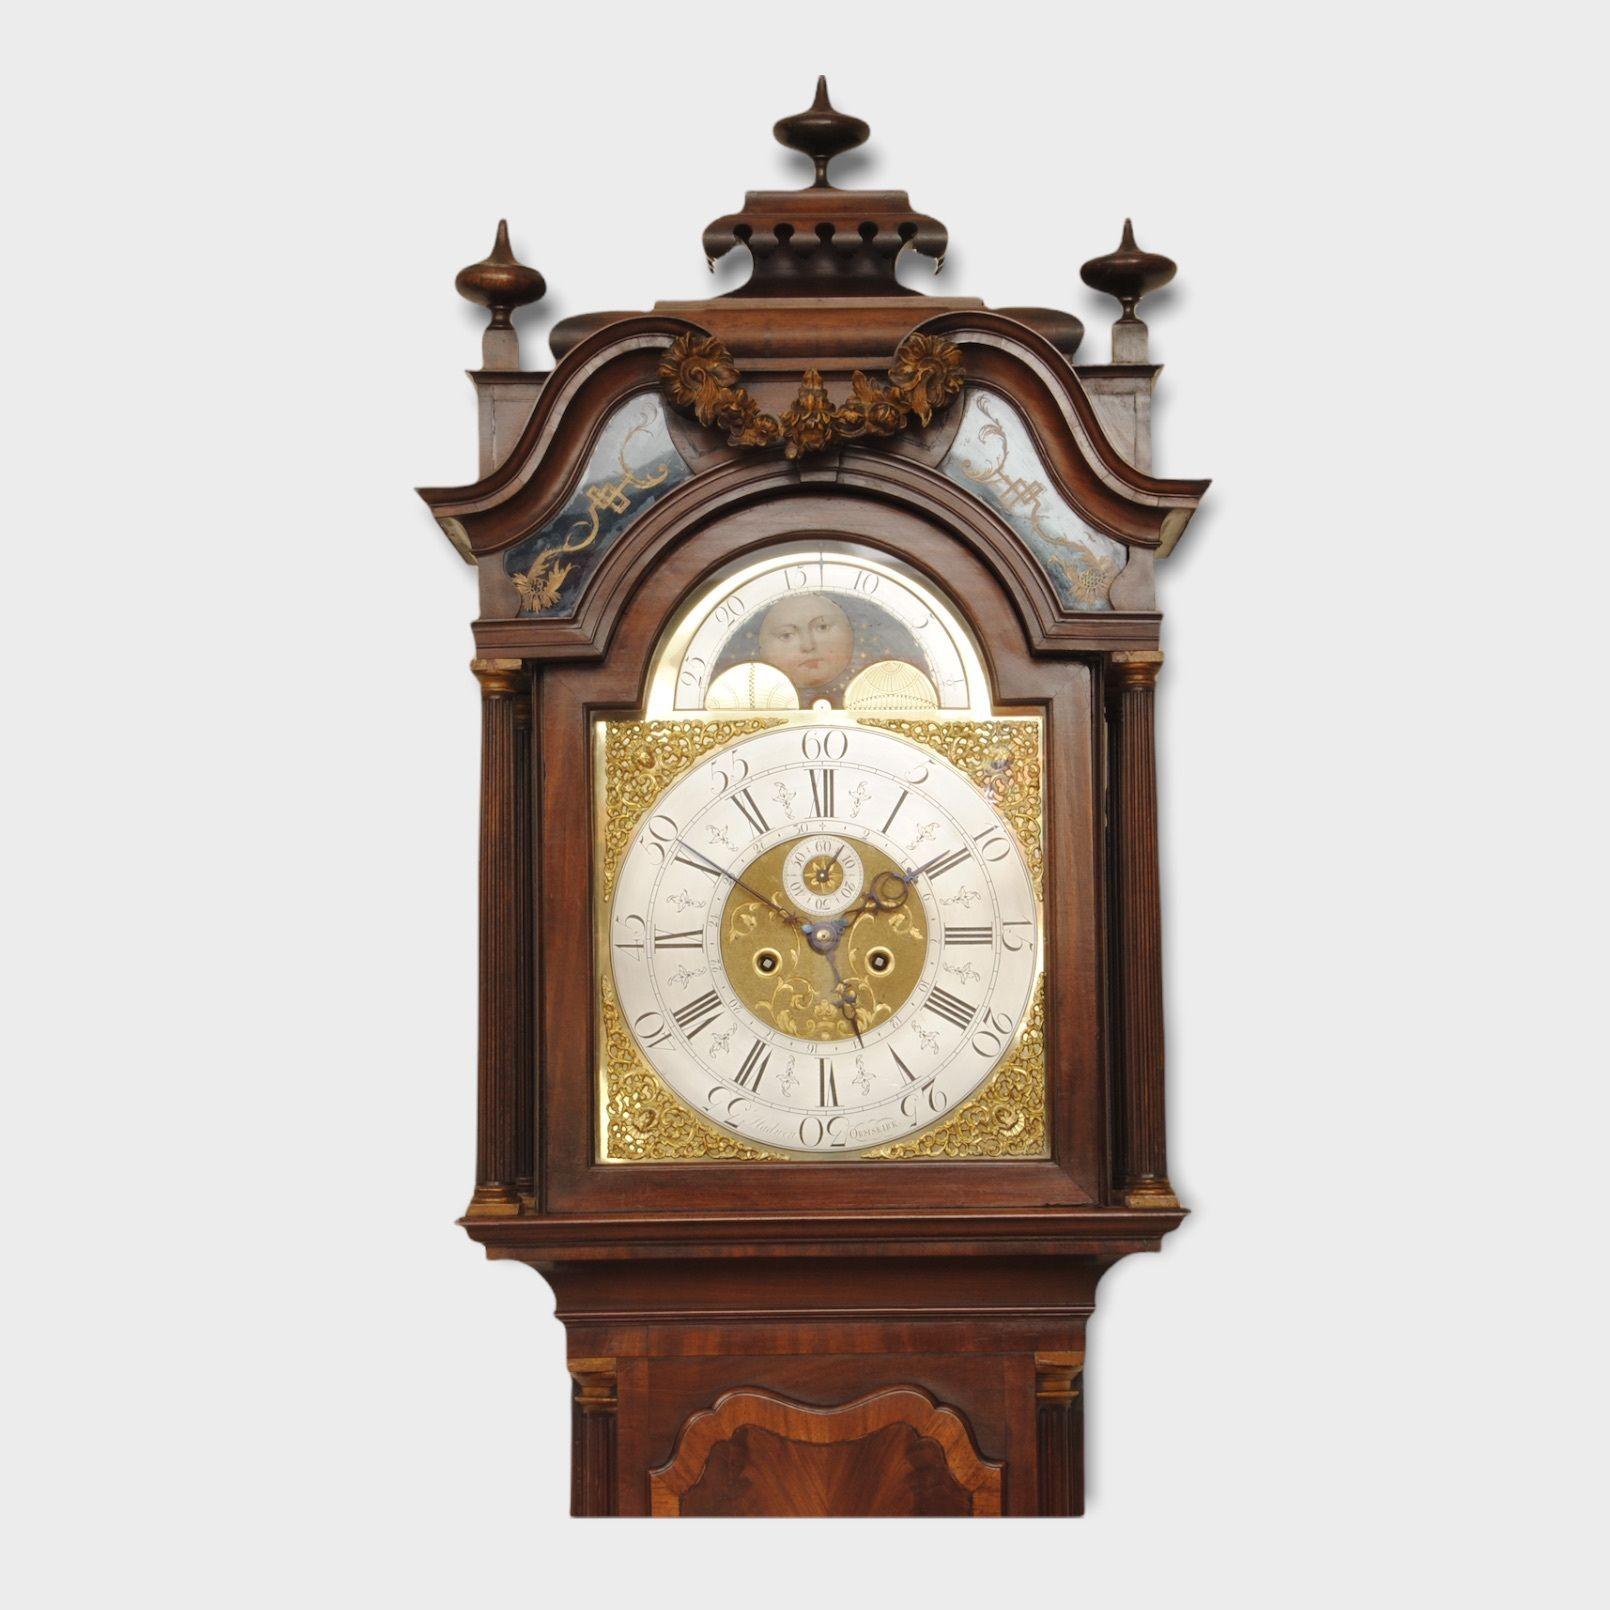 A fine example of an eight day longcase clock with wonderful full brass dial, moon roller and date hand. The superb mahogany case has a cross banded door veneered in flame mahogany with reeded columns to the sides, the base also has a cross banded